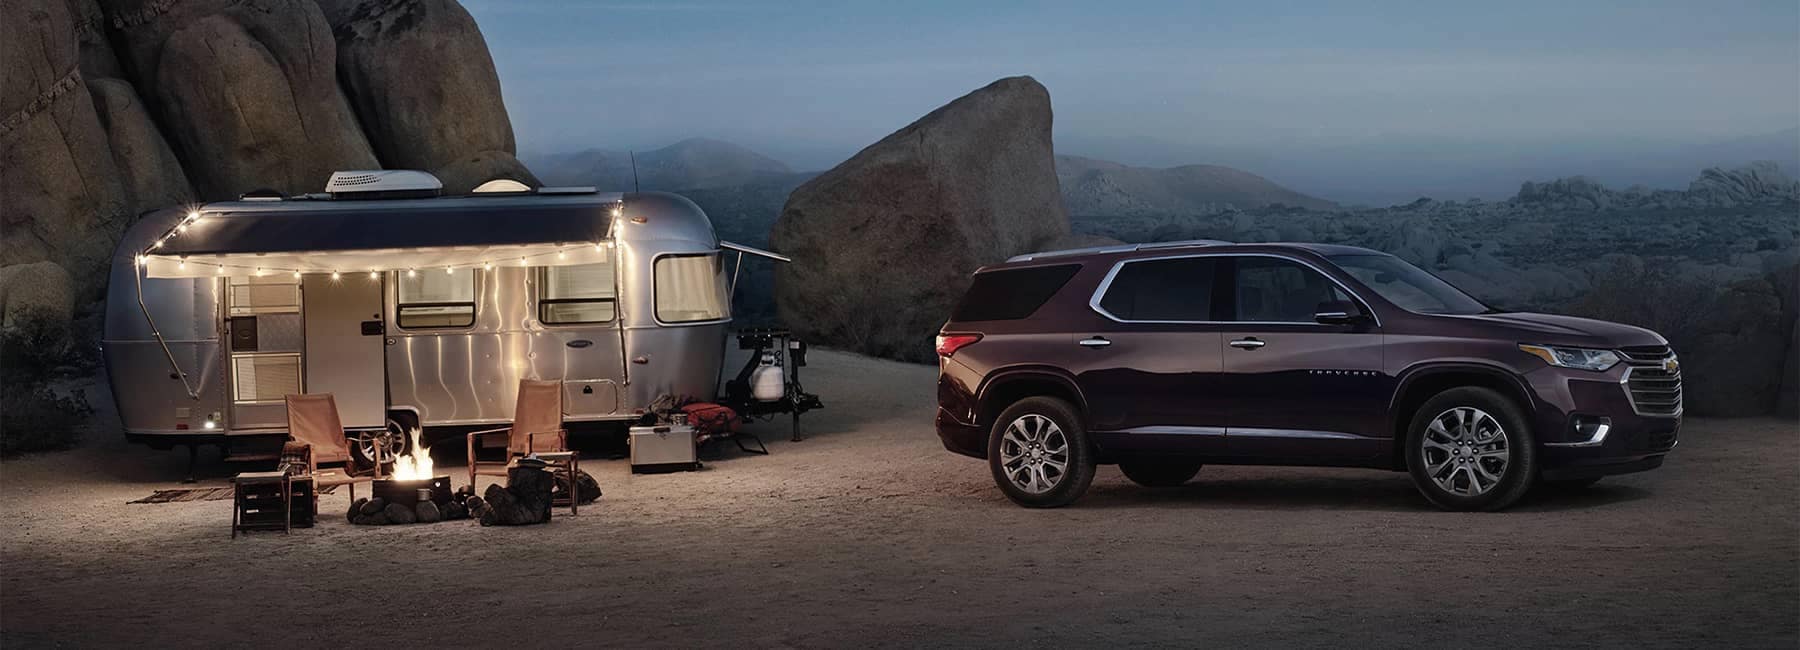 2020 Chevrolet Traverse Mid-Size SUV Towing Trailer